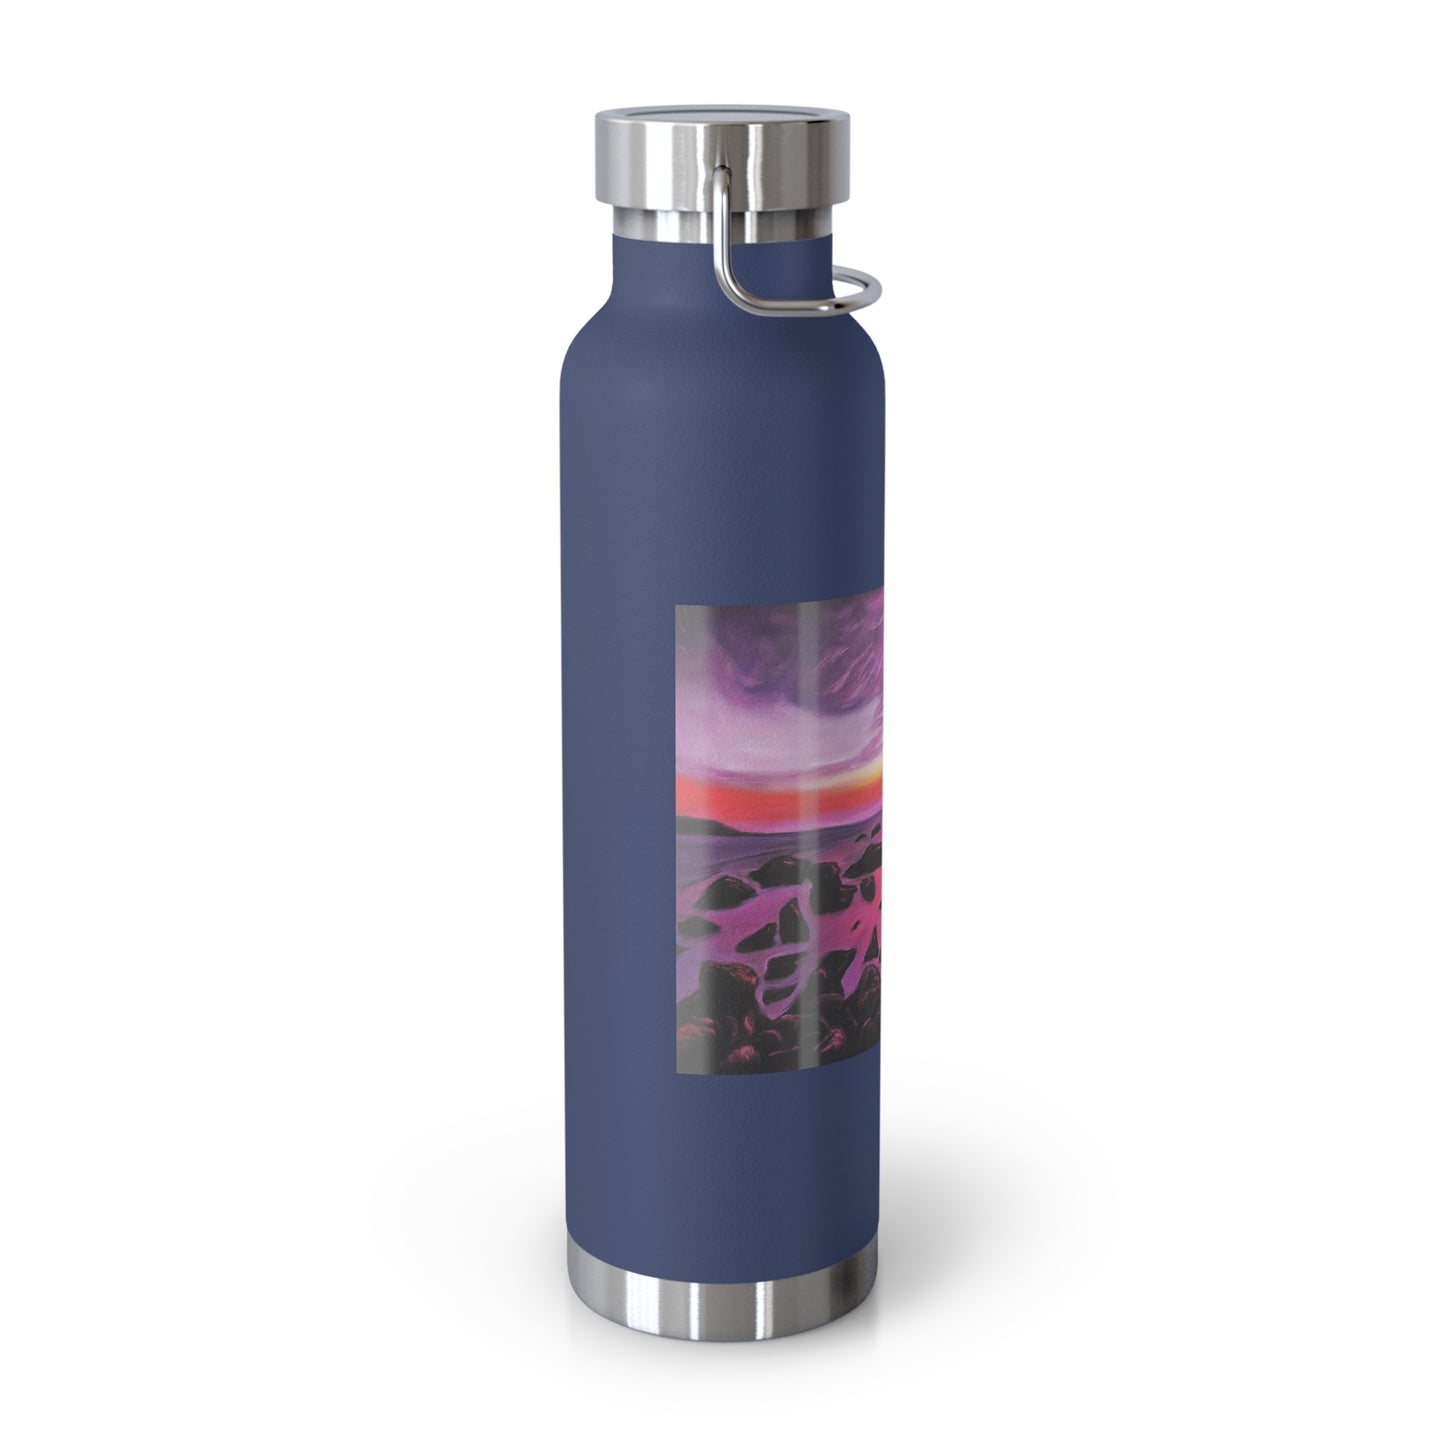 "Sunset at Sea" Copper Vacuum Insulated Bottle, 22oz